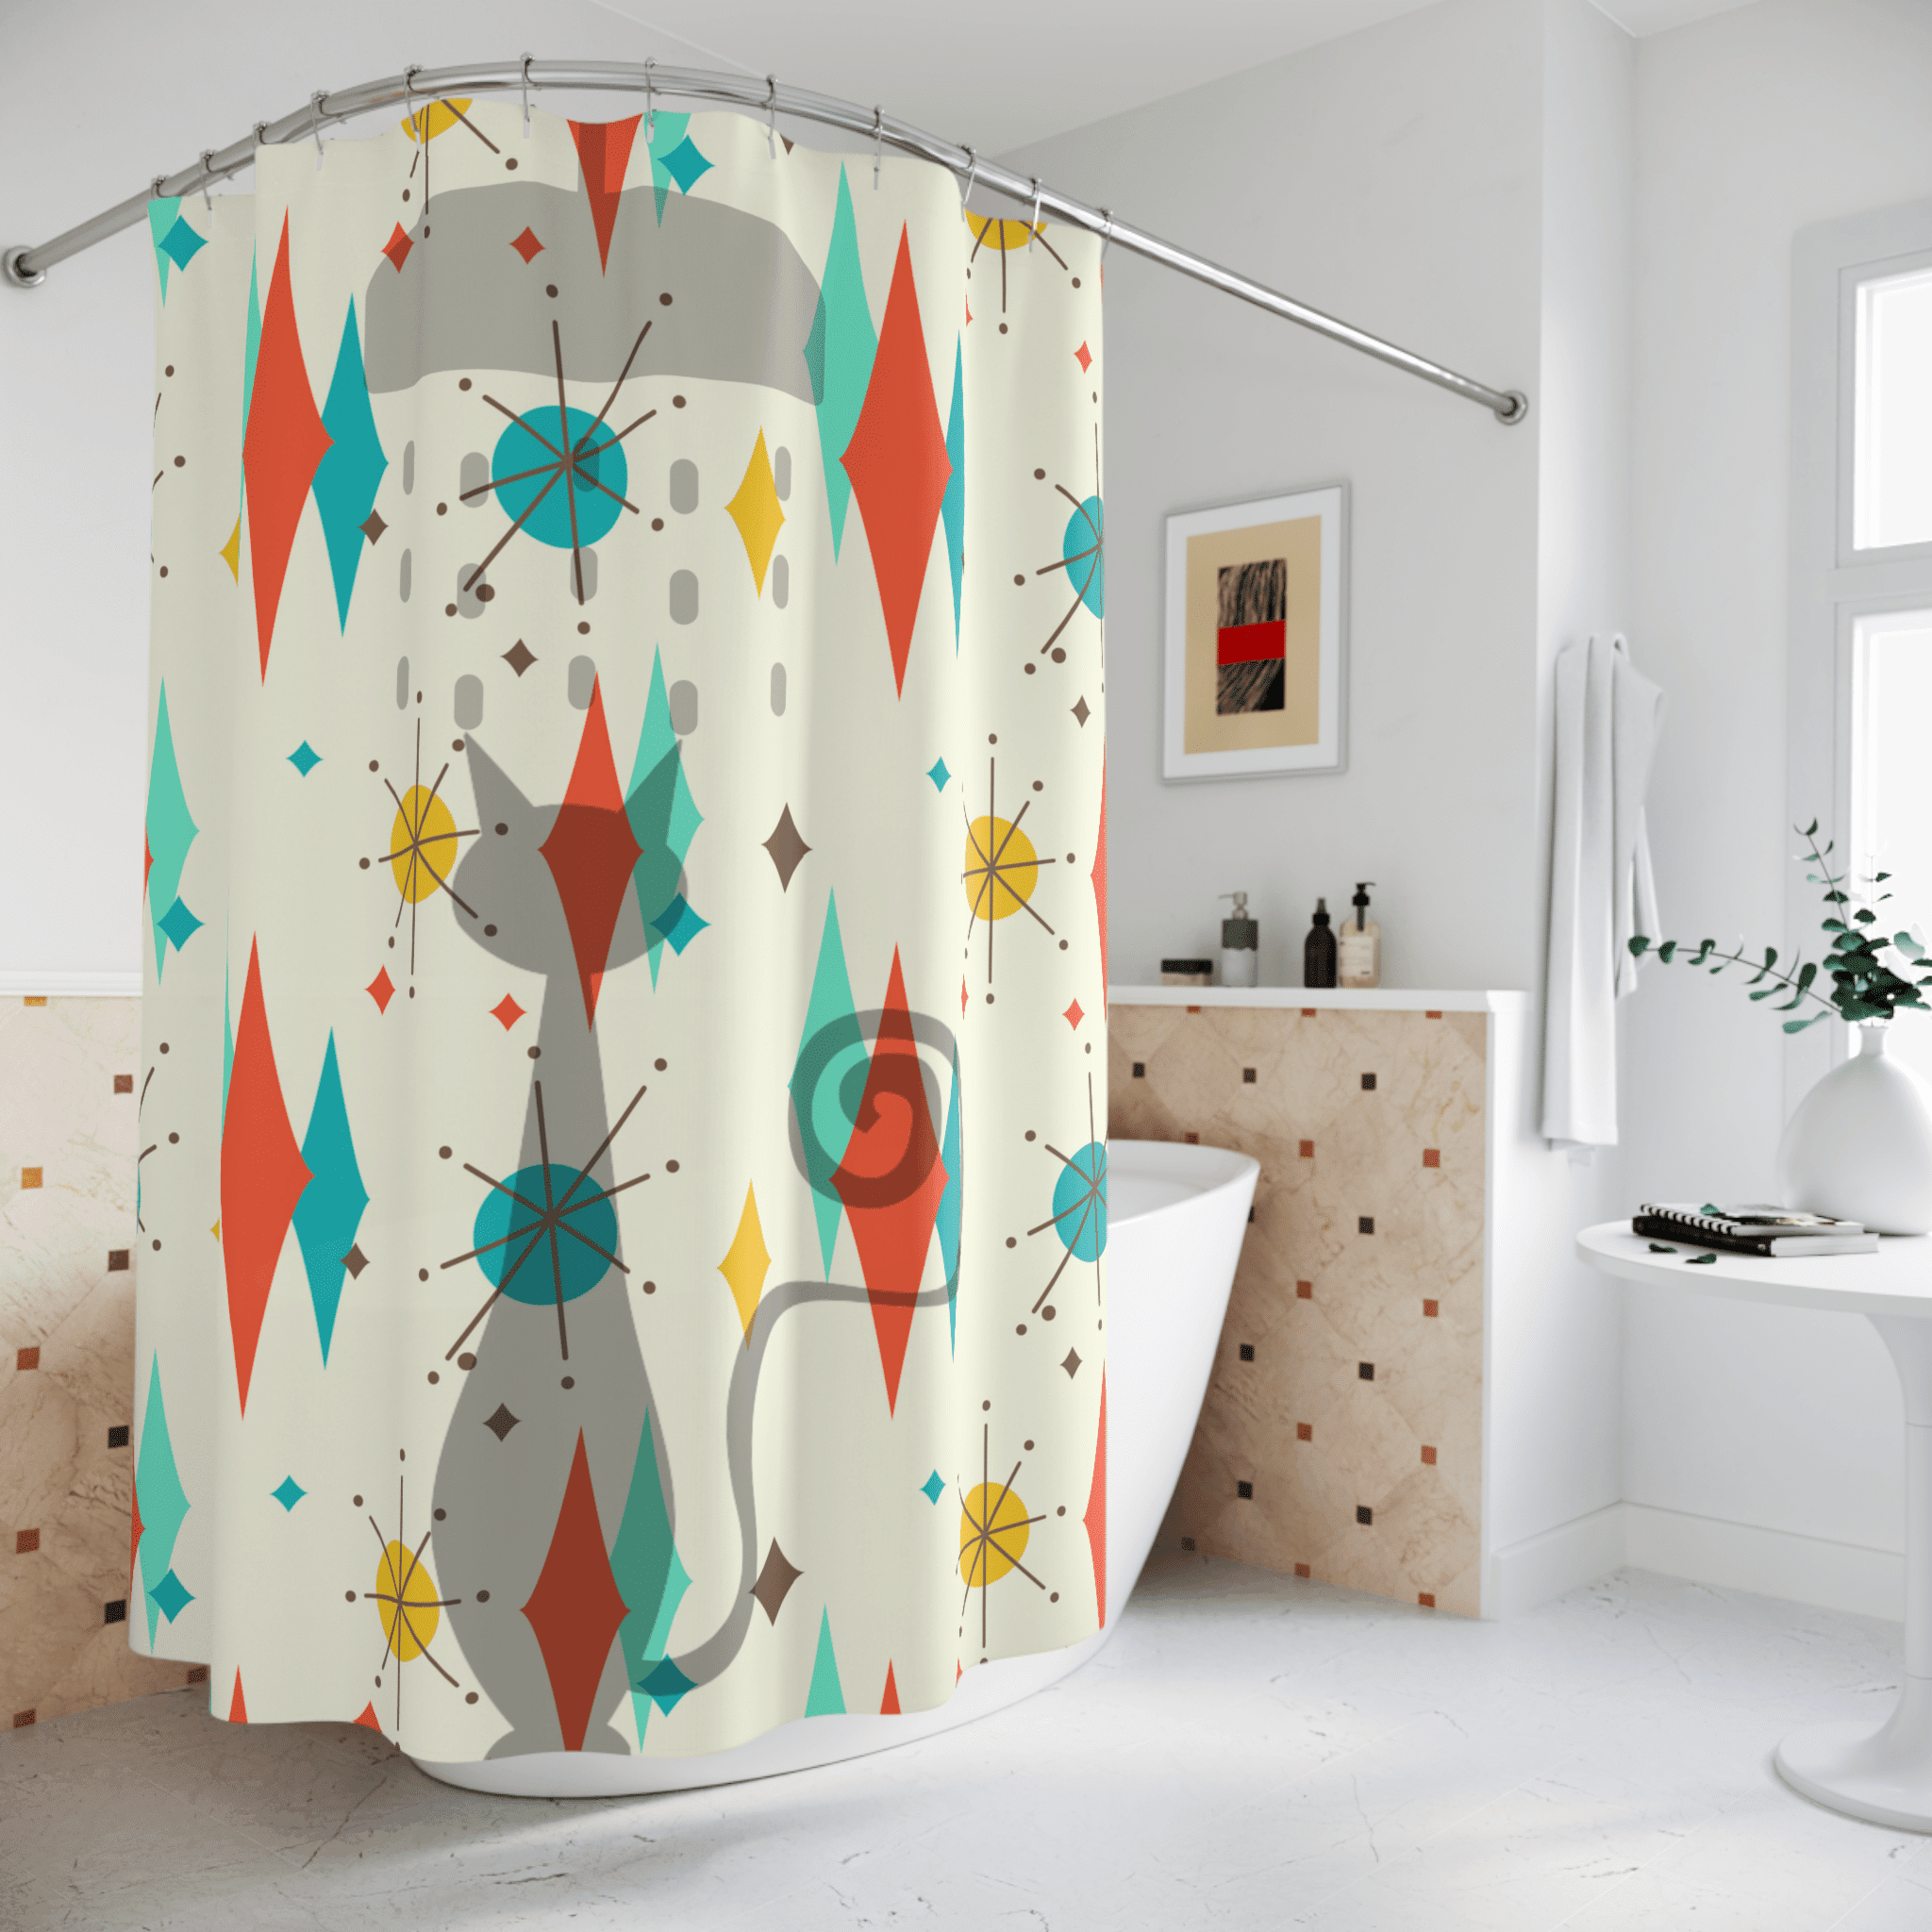 Atomic Cat, Mid Mod Cat Shower Time Franciscan Pattern Starburst Diamond, Fun Whimsical Mid Century Modern Shower Curtains Home Decor 71&quot; × 74&quot;